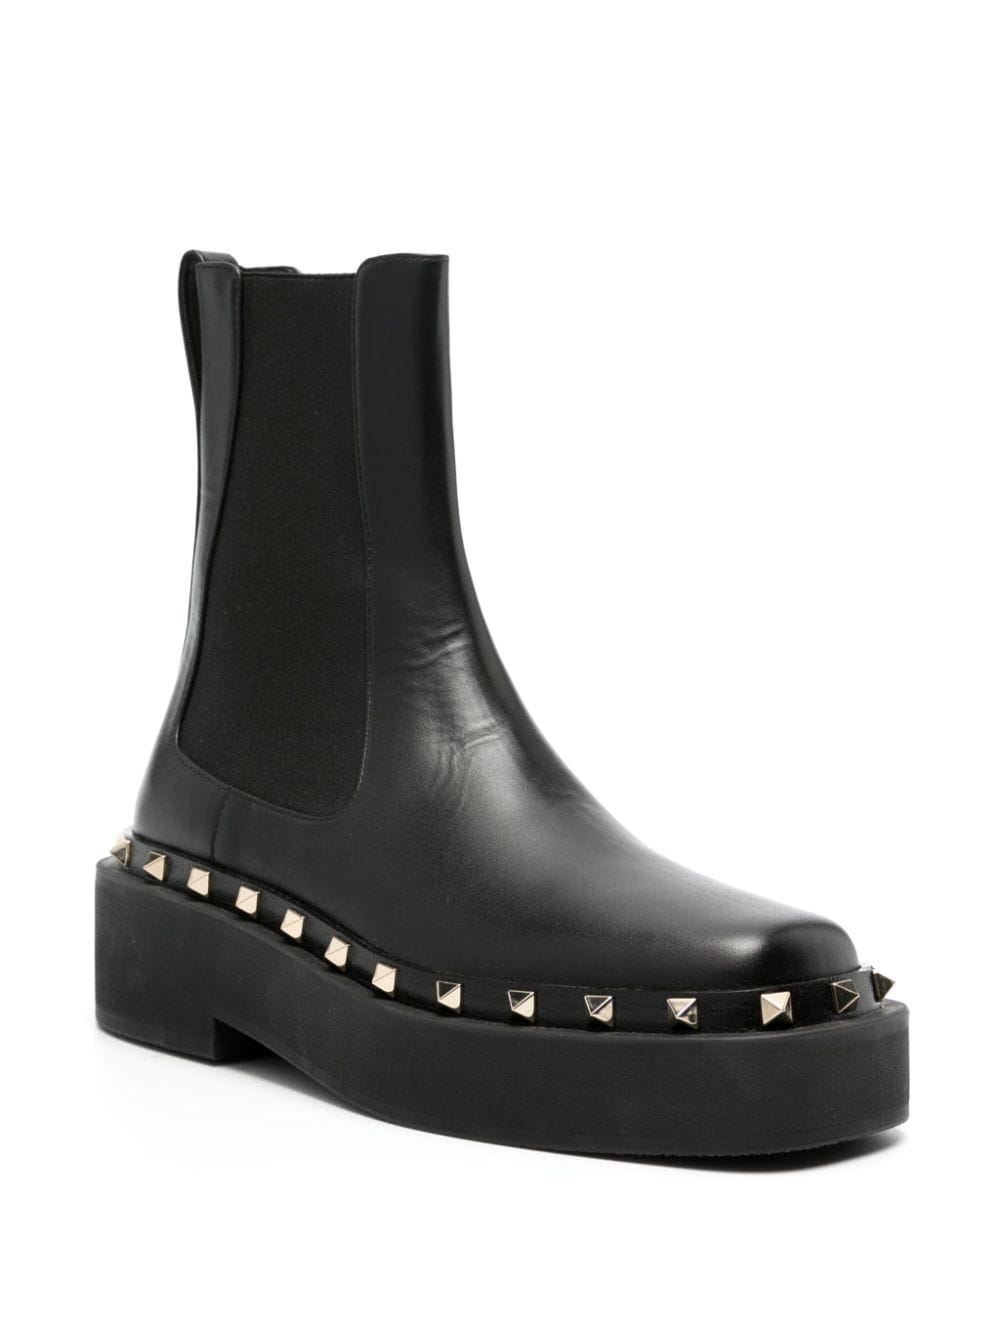 VALENTINO - Rockstud Chelsea leather boots